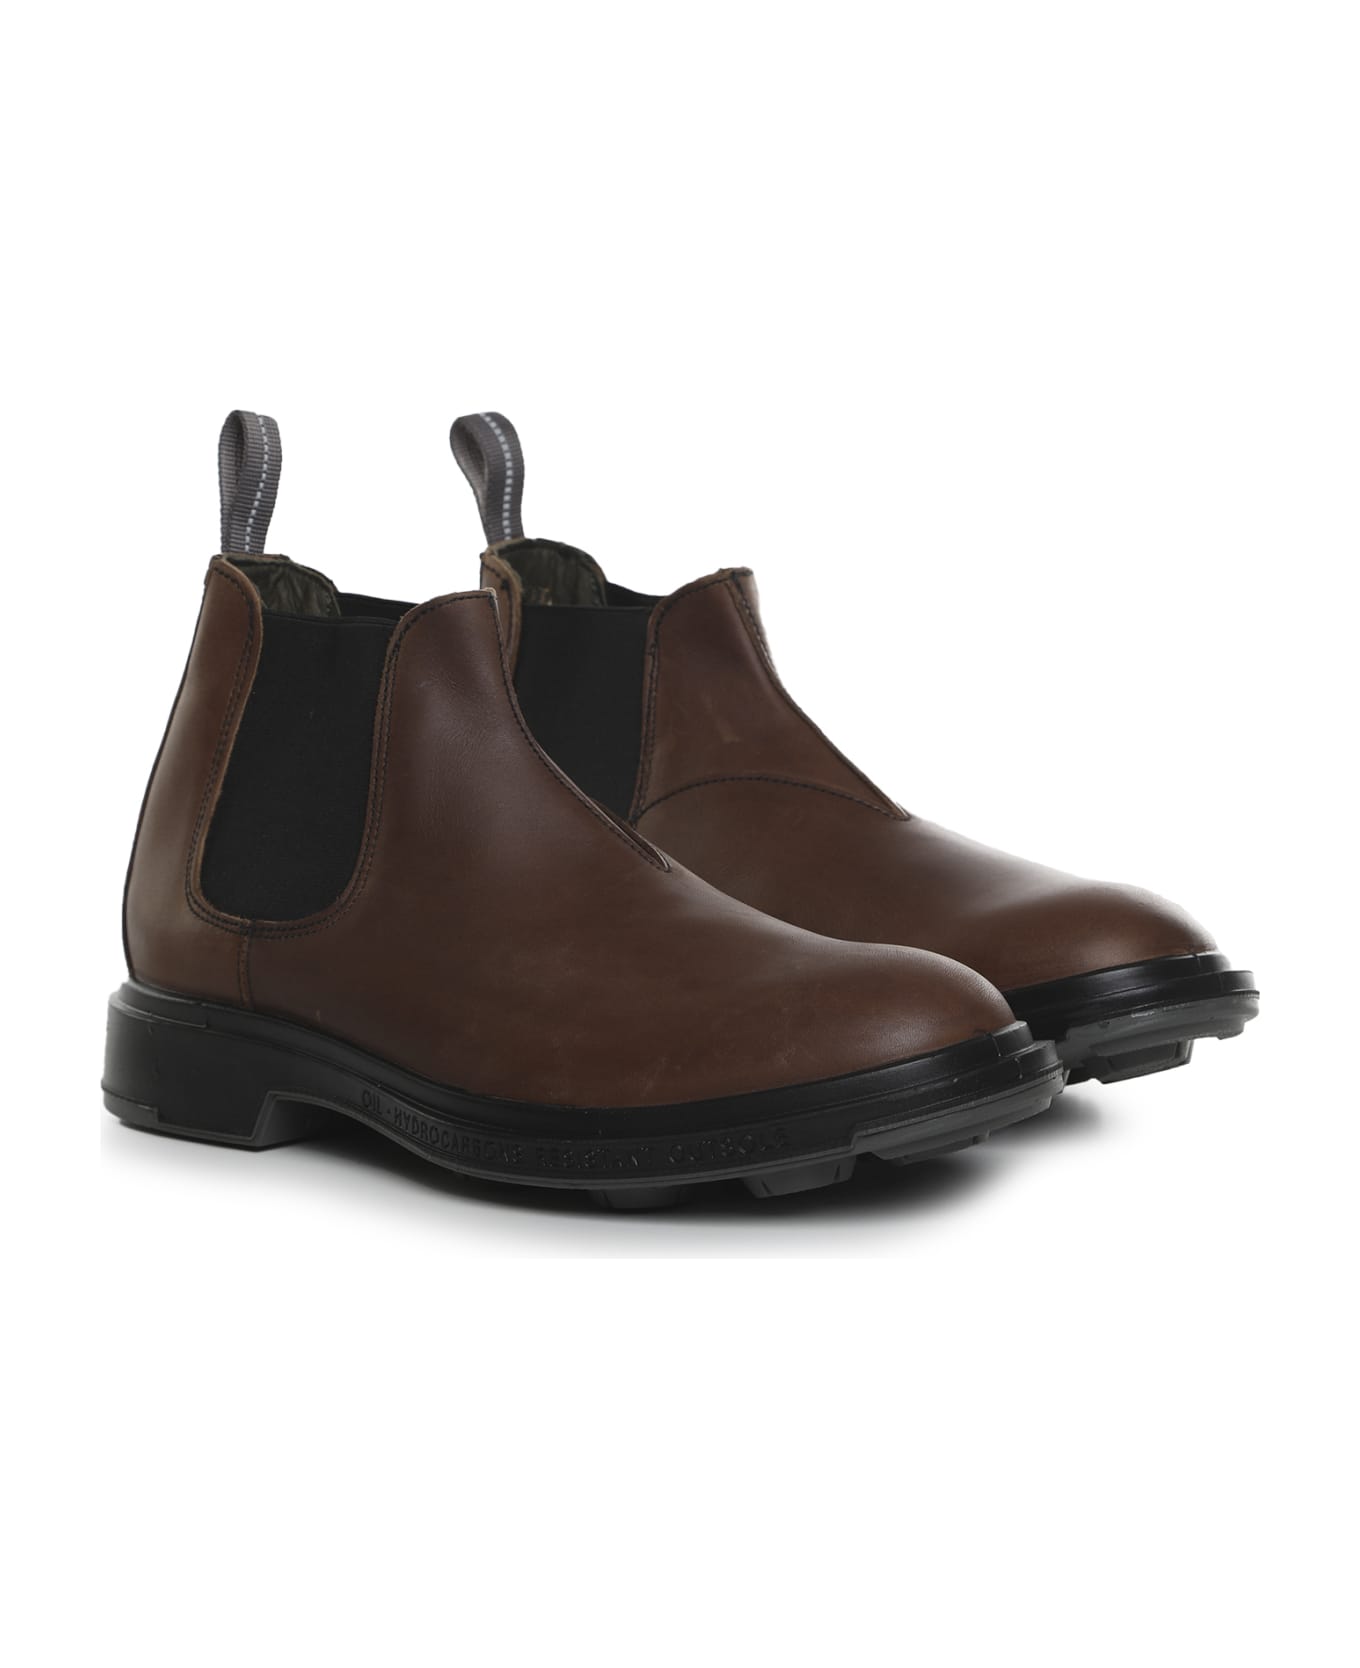 Pezzol 1951 Royal Ankle Boots - Brown